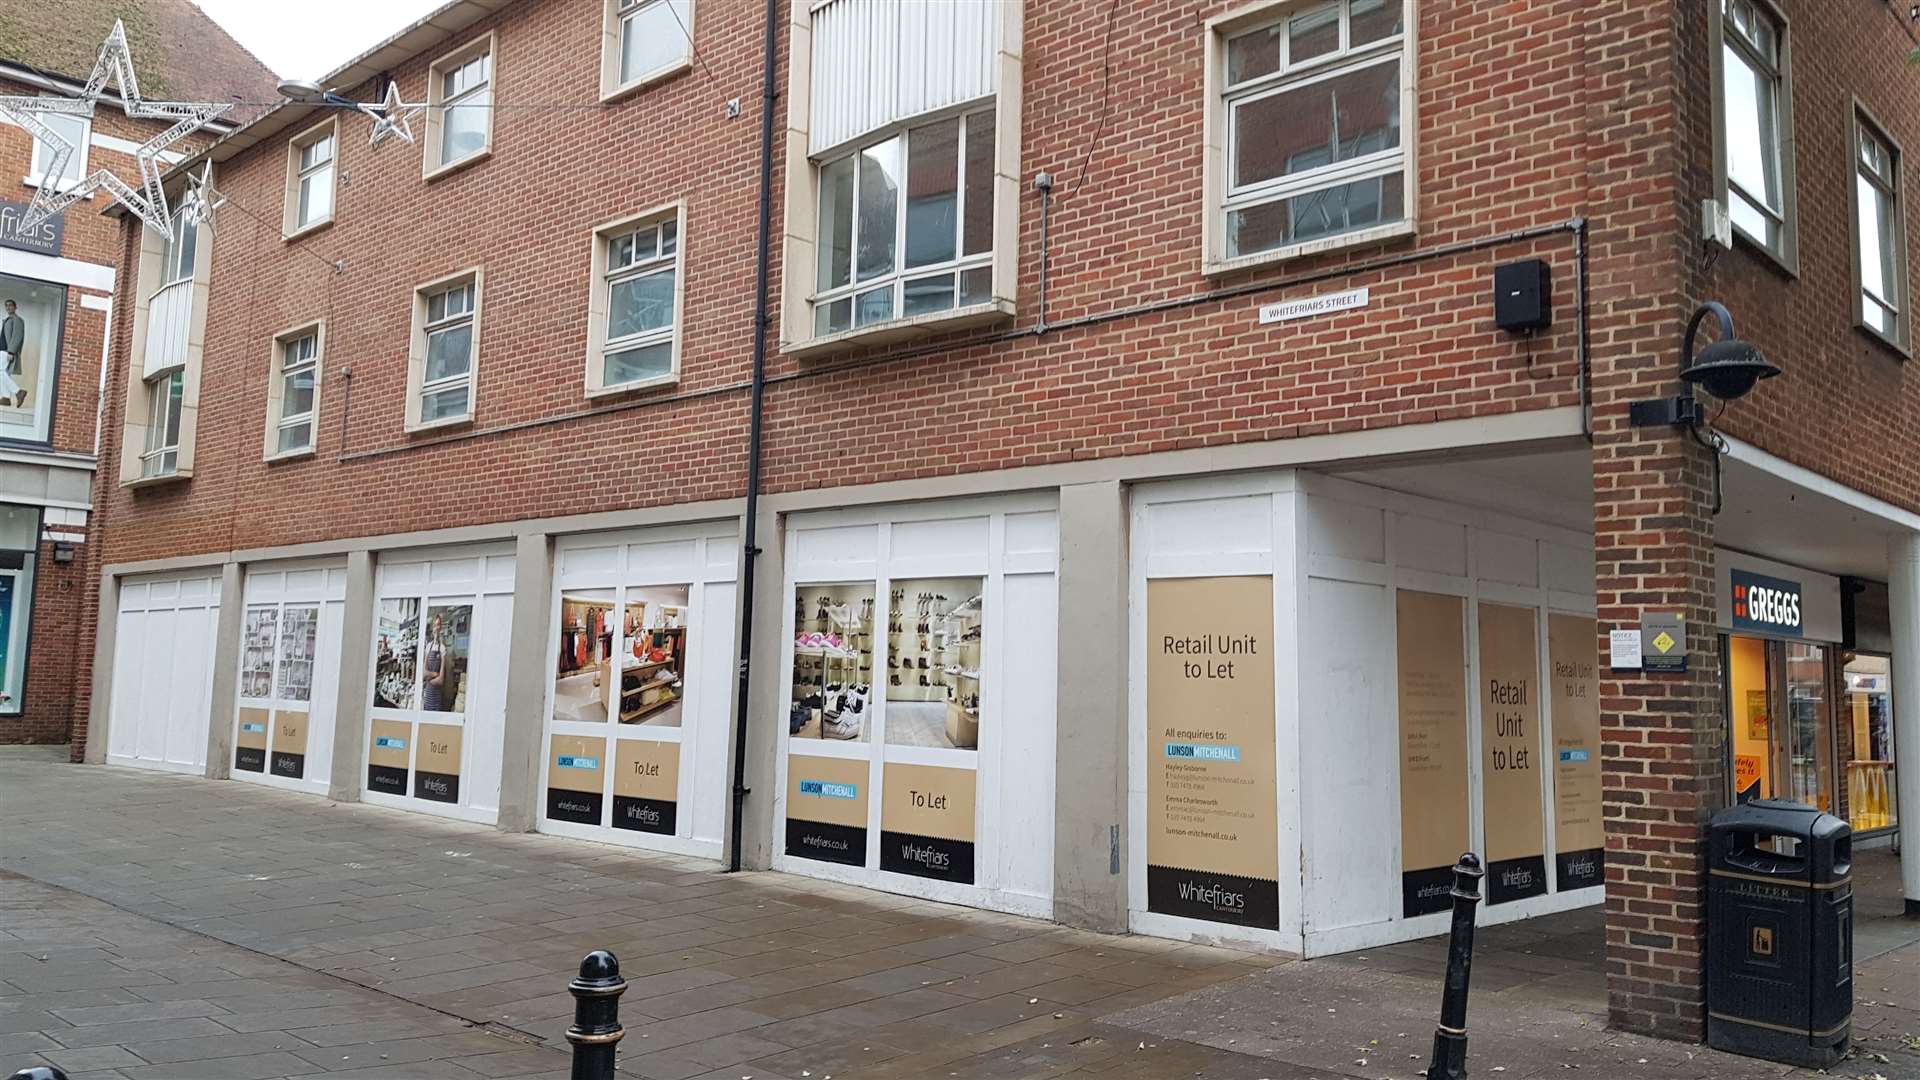 A bubble tea chain is hoping to move into the old Beaverbrooks unit next to Greggs